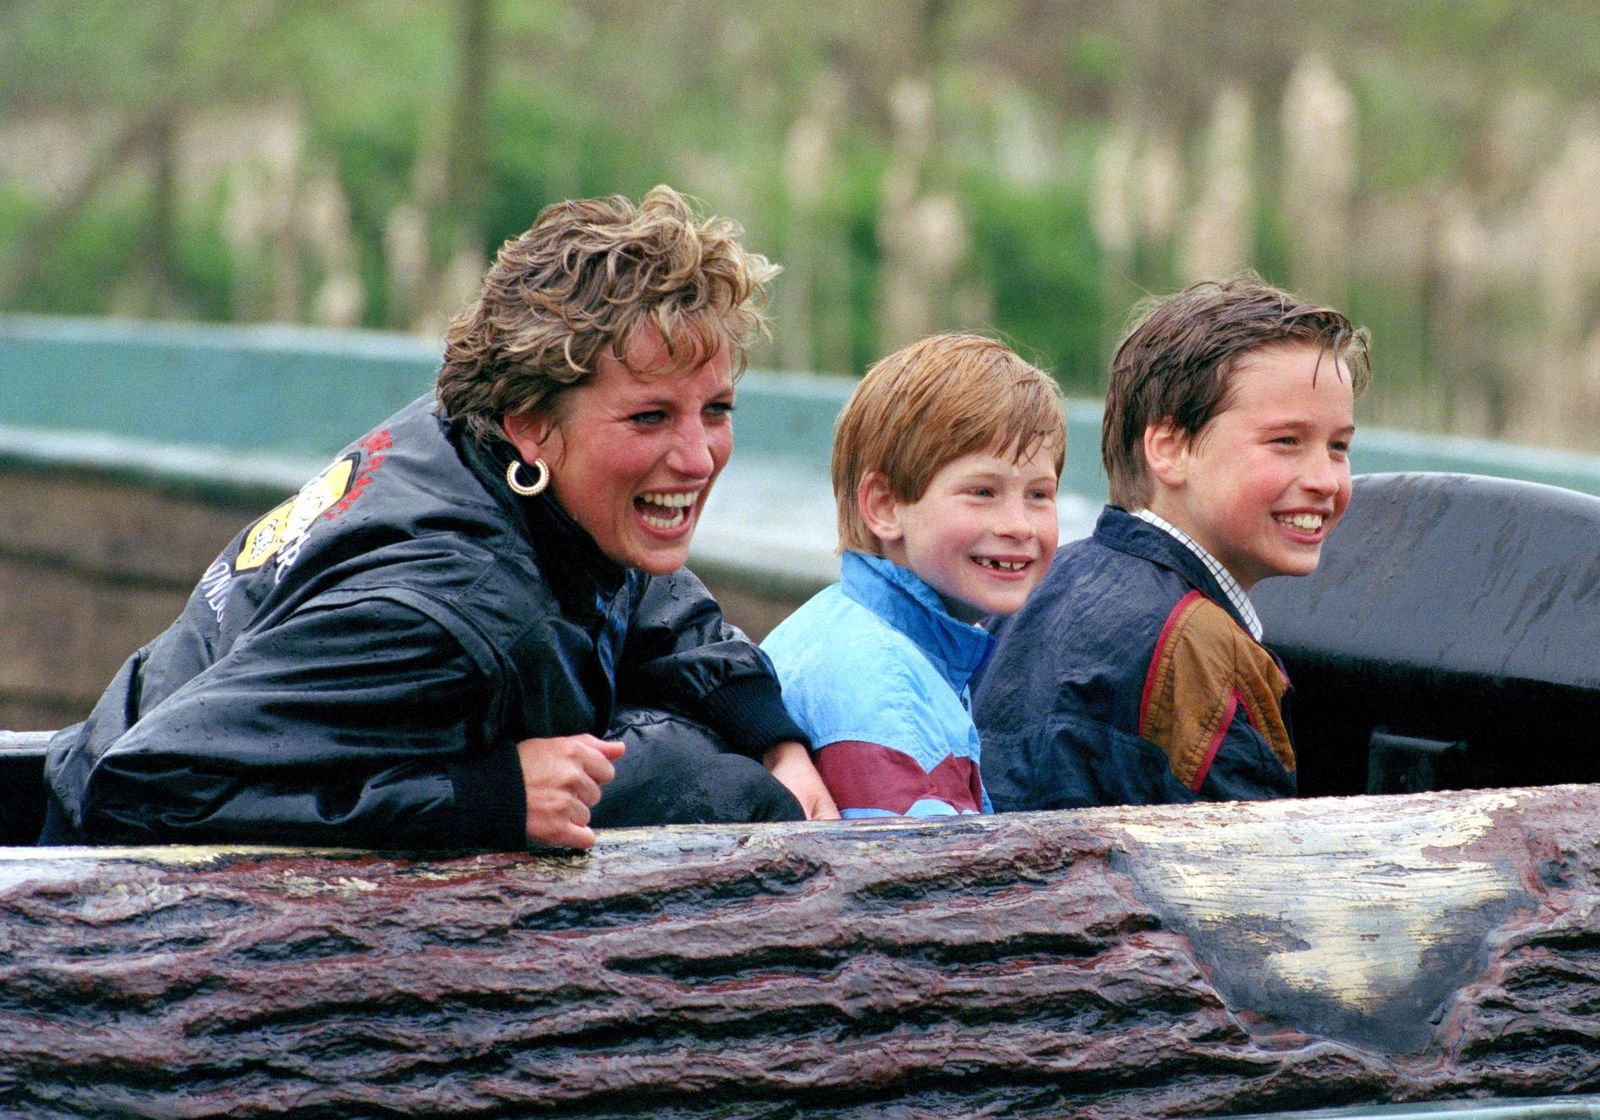 Princess Diana, Prince William, and Prince Harry at The "Thorpe Park" Amusement Park on April 13, 1993 | Source: Getty Images